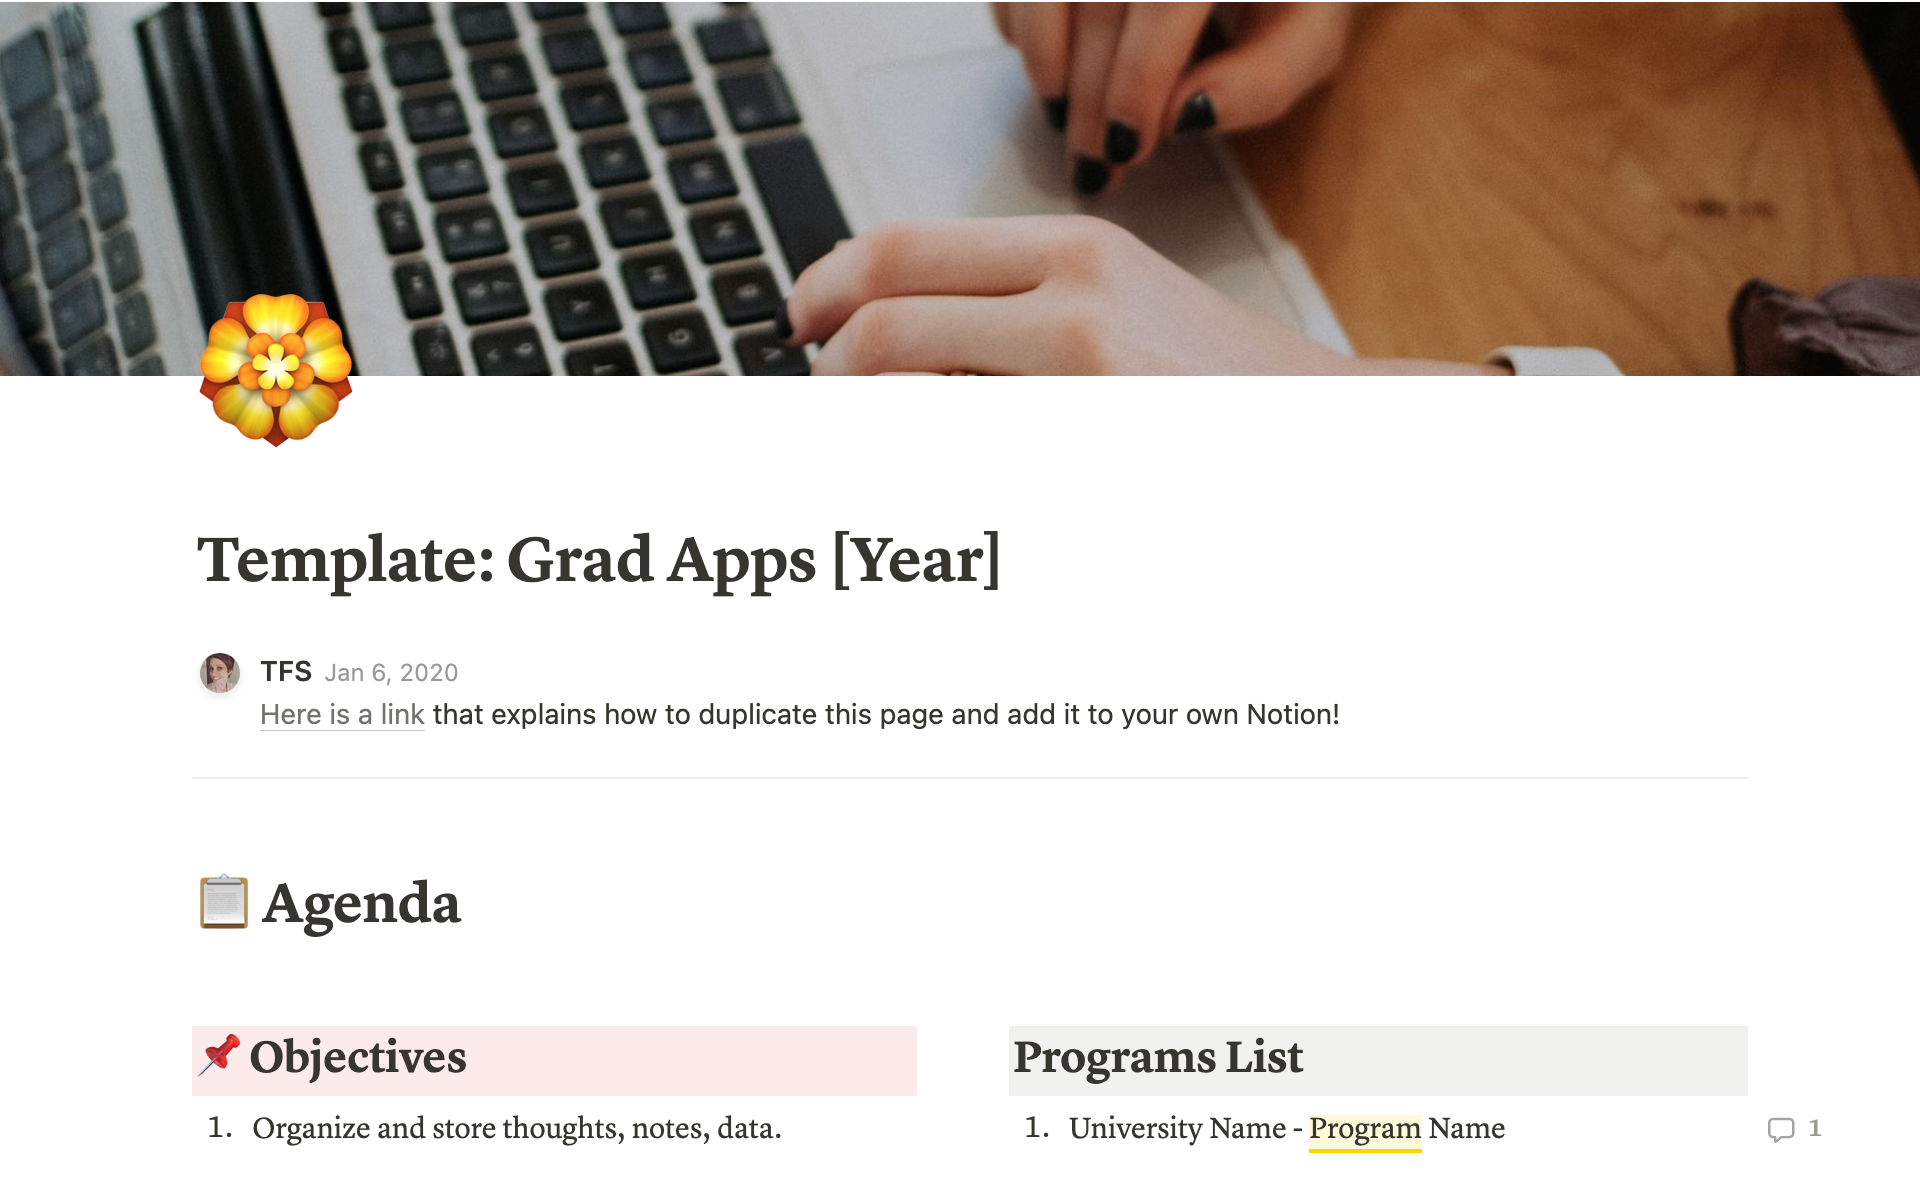 This template helps research, plan, and track graduate applications from start to finish!